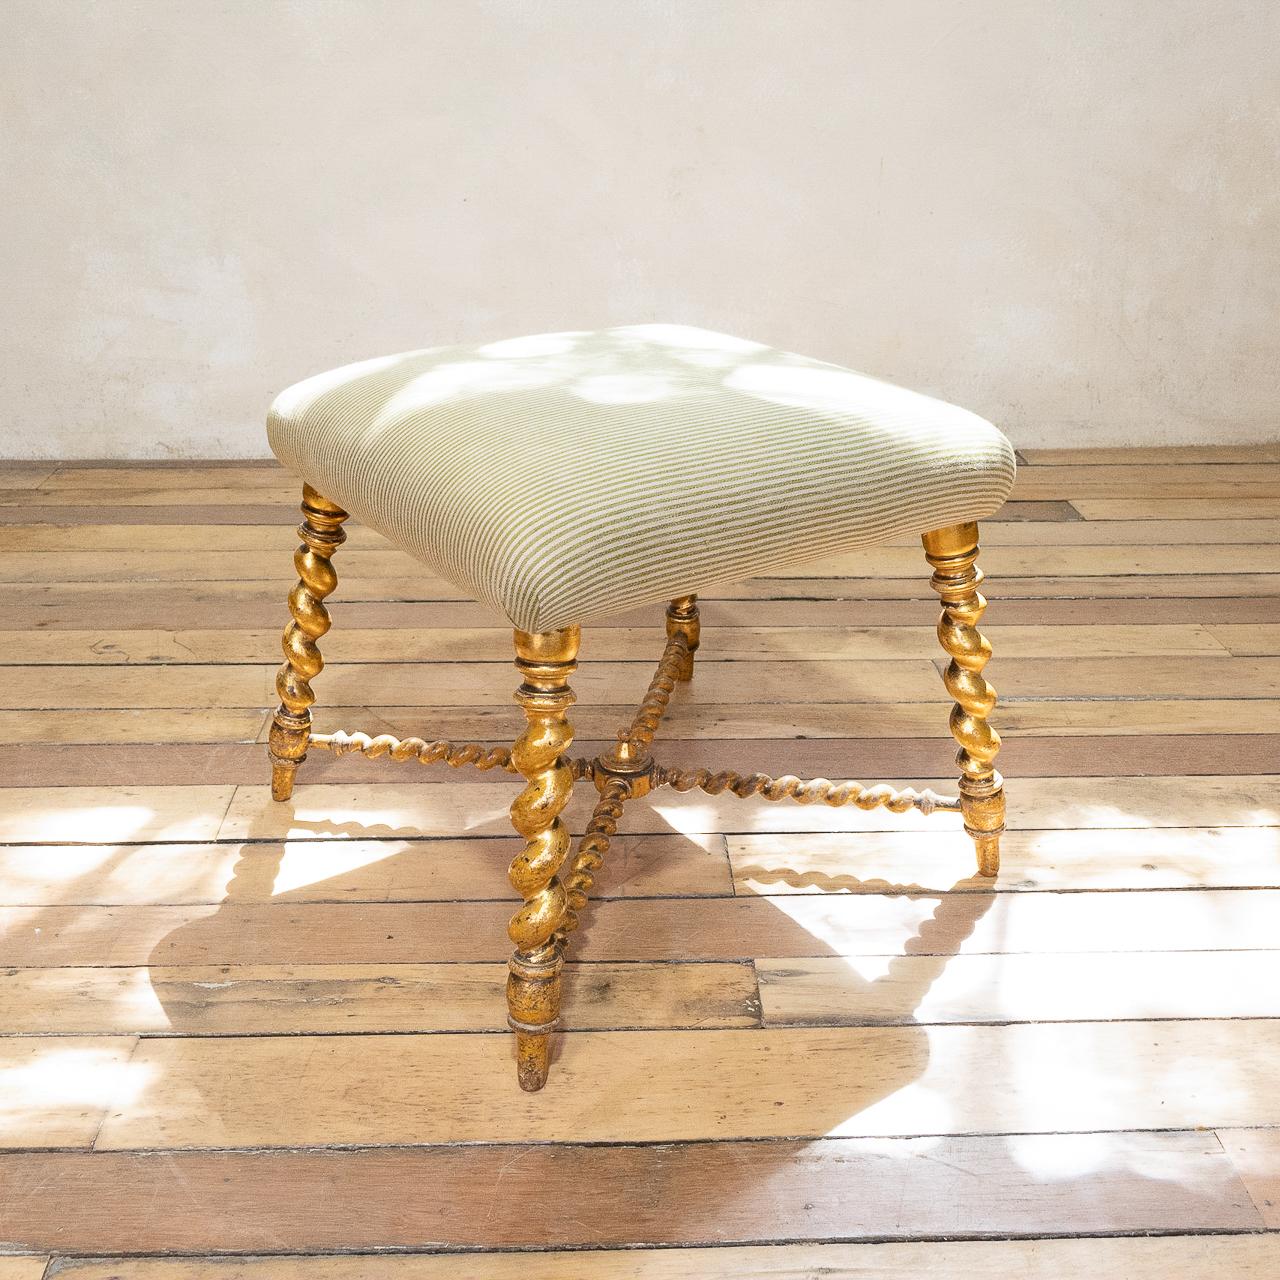 19th Century French Napoleon III Square Giltwood Barley Twist Footstool Ottoman For Sale 3